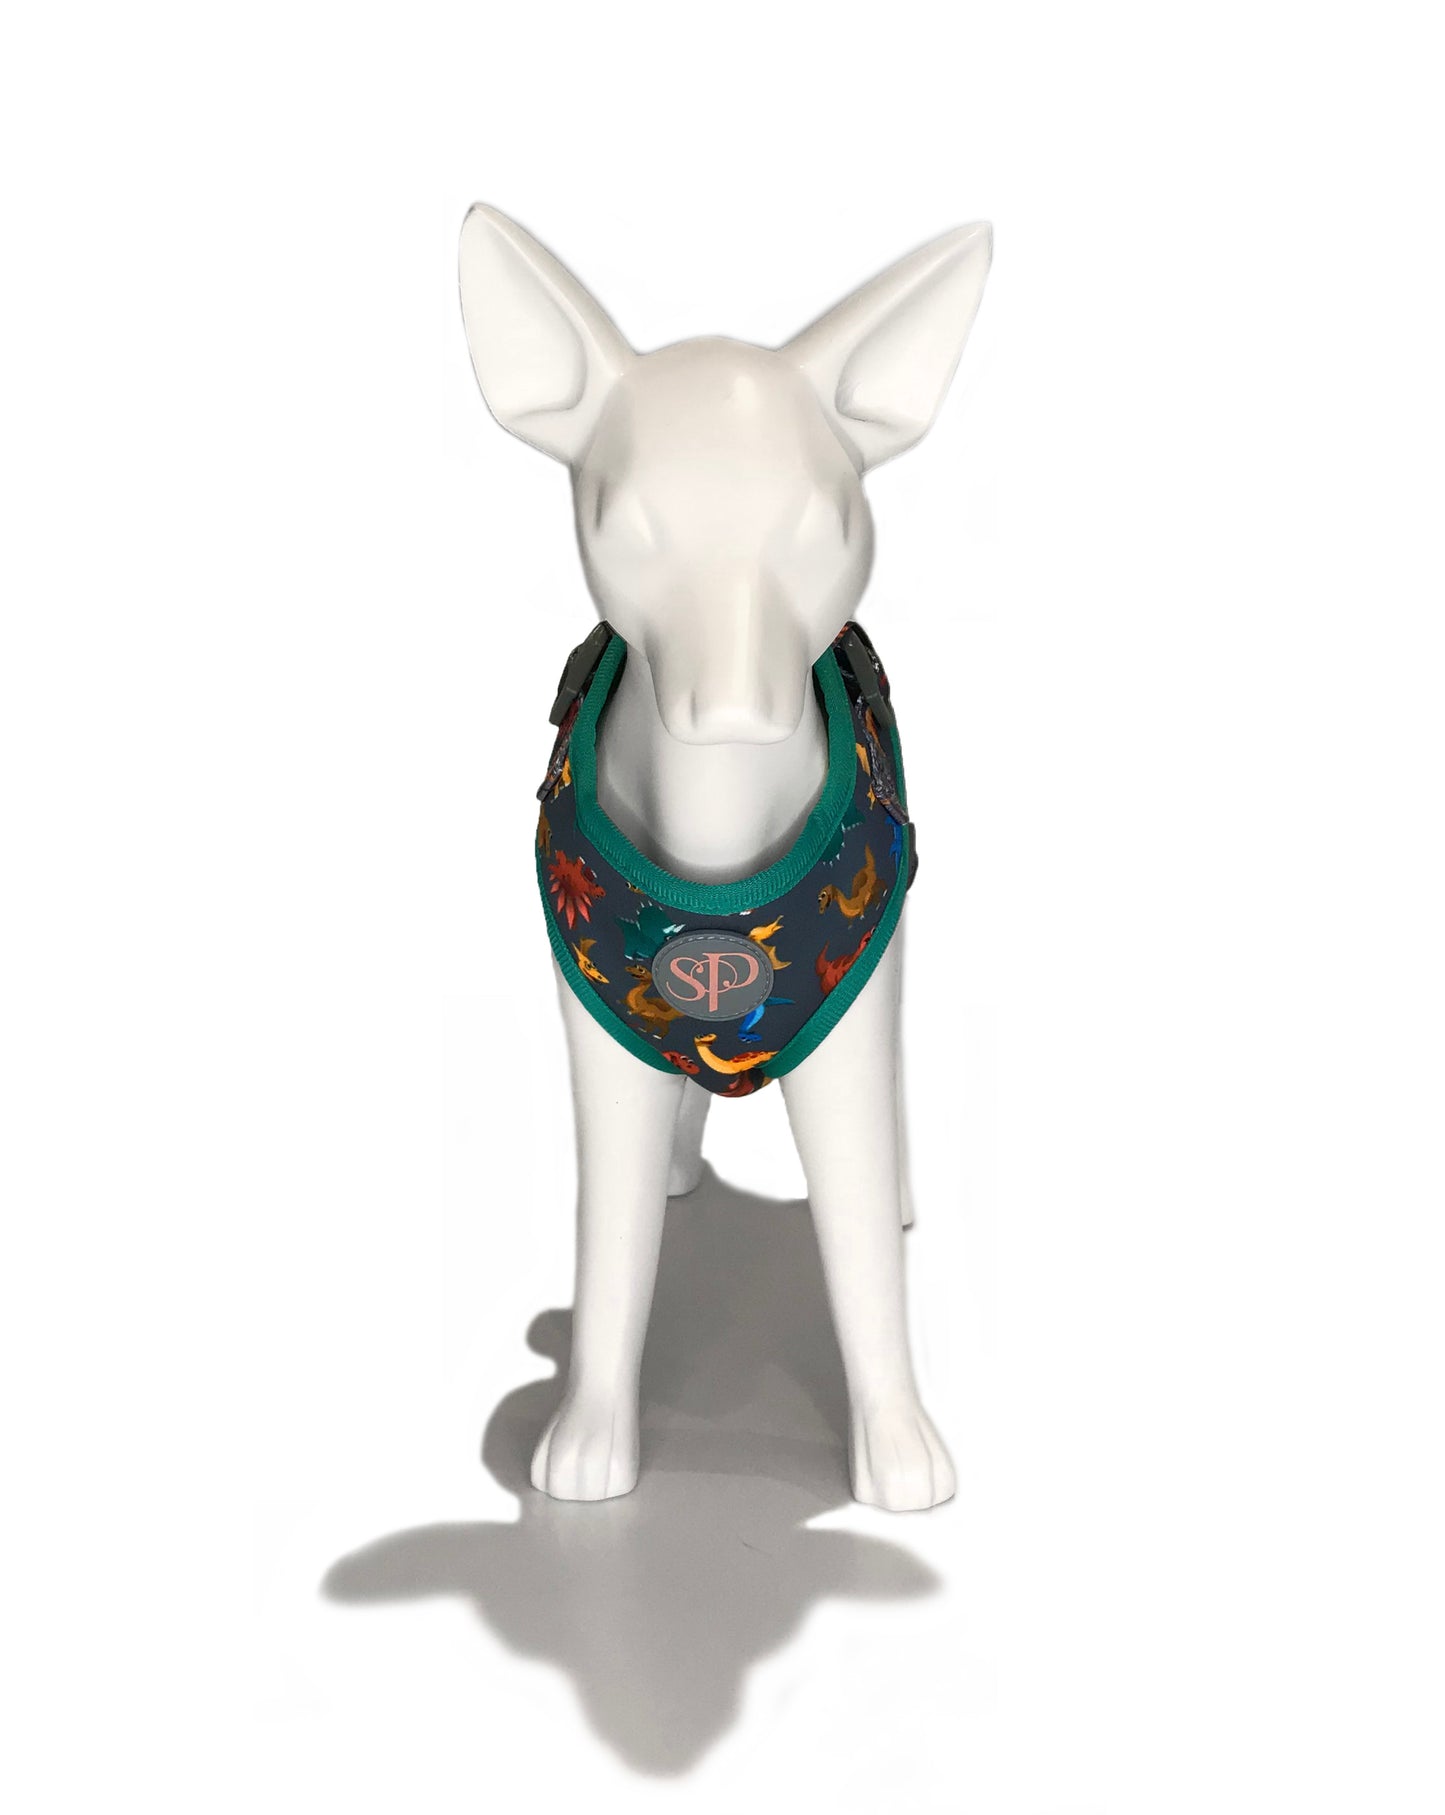 A cute and colourful dinosaur design ready-made adjustable dog harness from the Dogasaurs